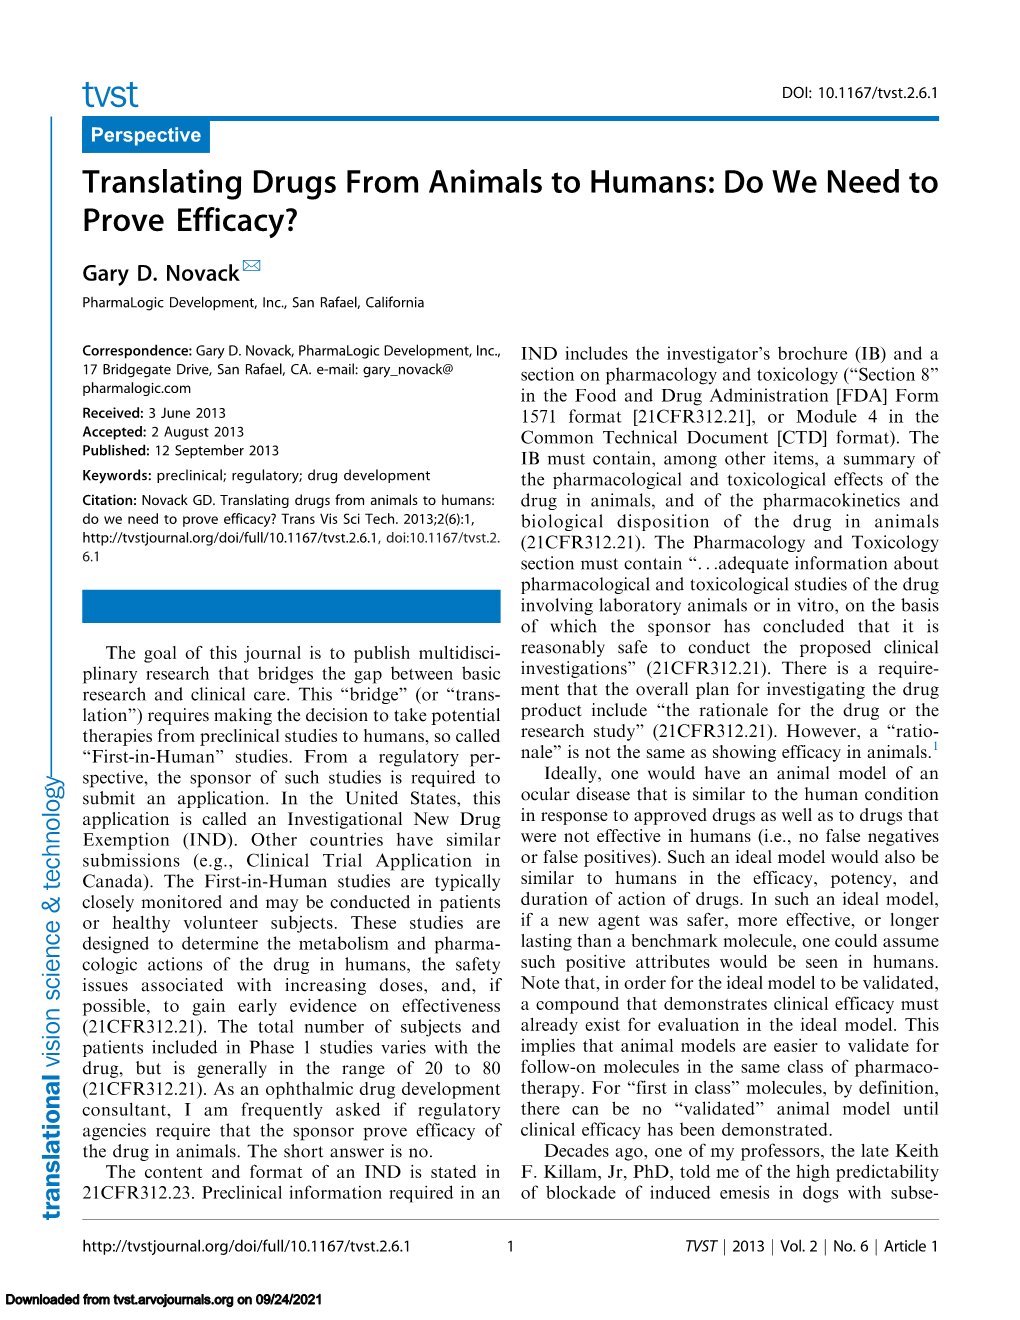 Translating Drugs from Animals to Humans: Do We Need to Prove Efficacy?